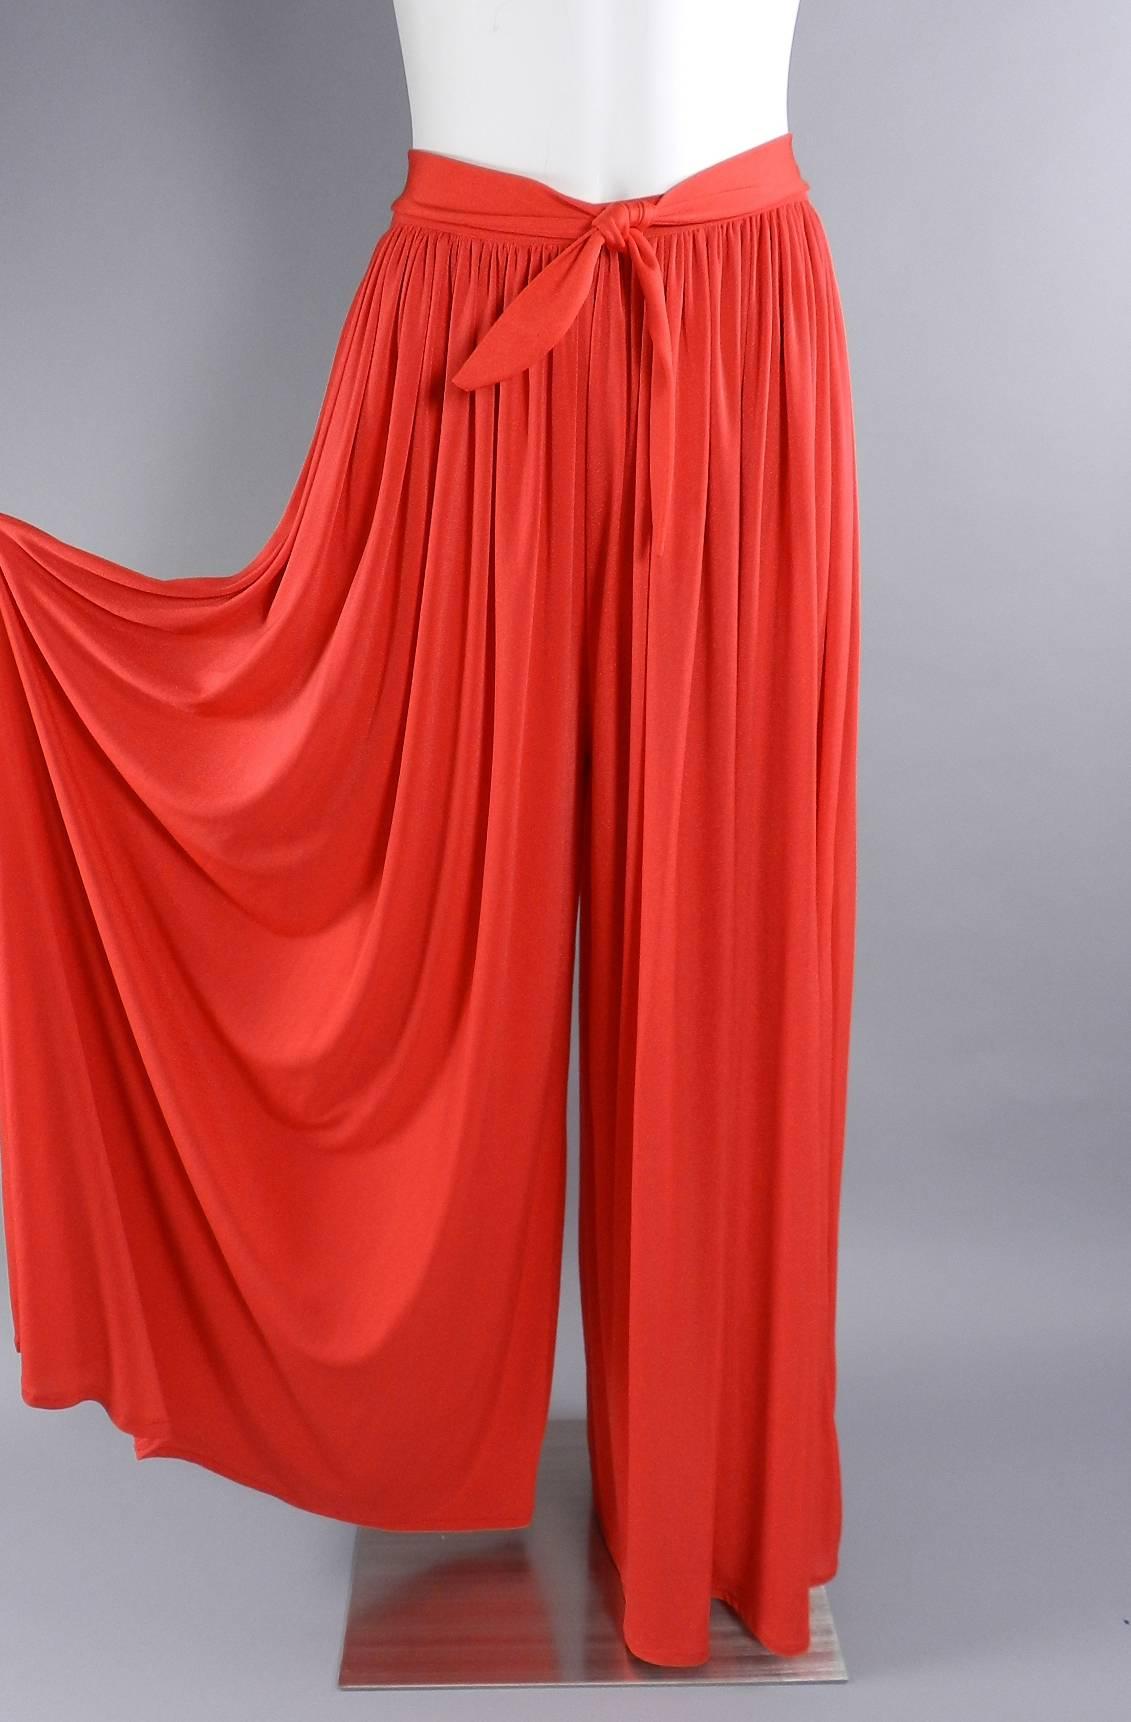 Vintage circa early 1980's Yves Saint Laurent tomato red palazzo pants. Polyester jersey, attached sash belt, centre back zipper. Waist 28